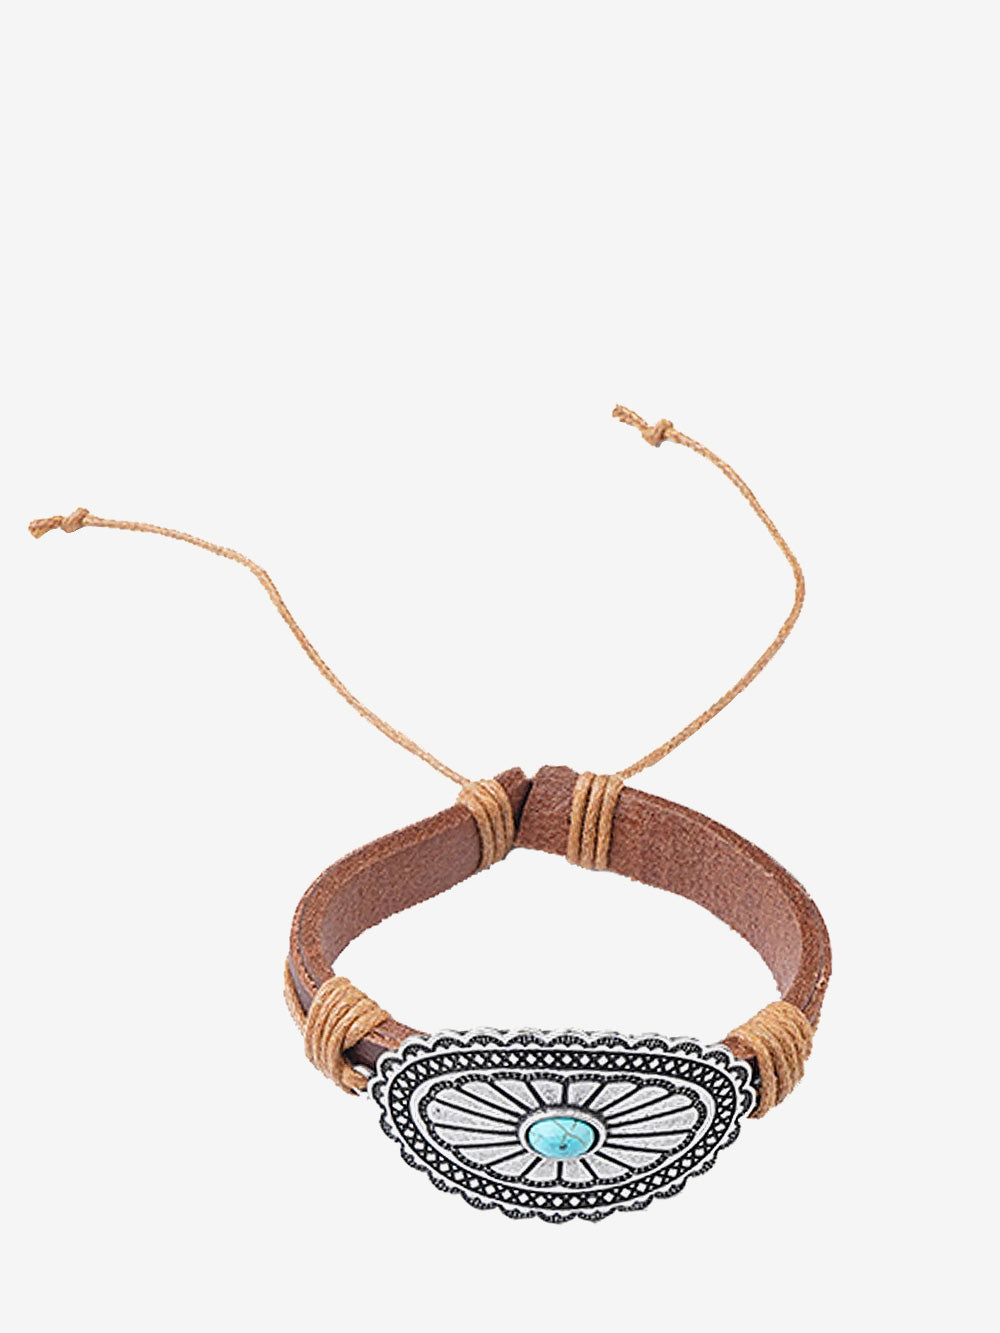 Montana West Coffee Oval Floral Sliver Concho Leather Cord Bracelet - Montana West World